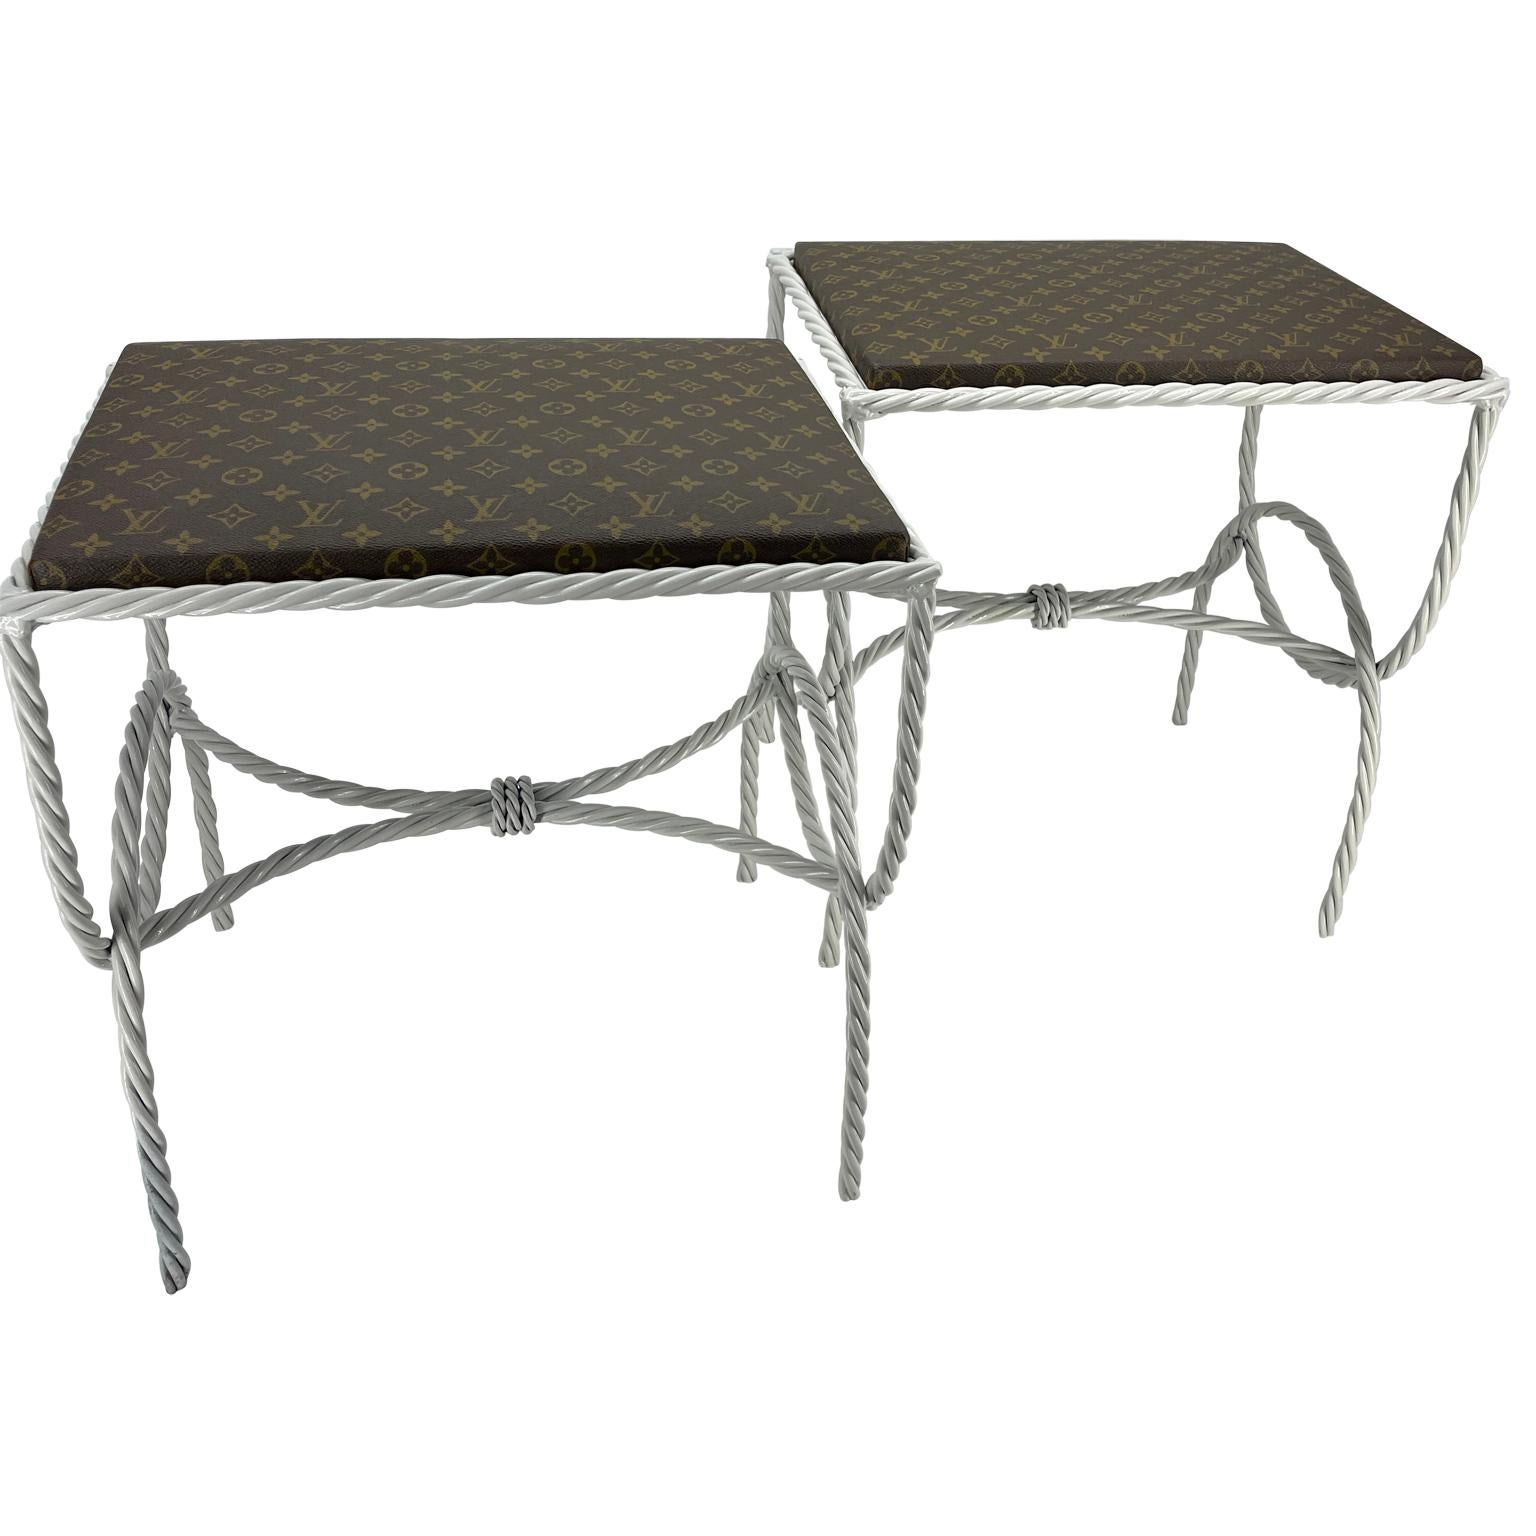 Mid-Century Modern Pair of Roped Iron Benches Side Tables with Louis Vuitton Monogram Fabric For Sale